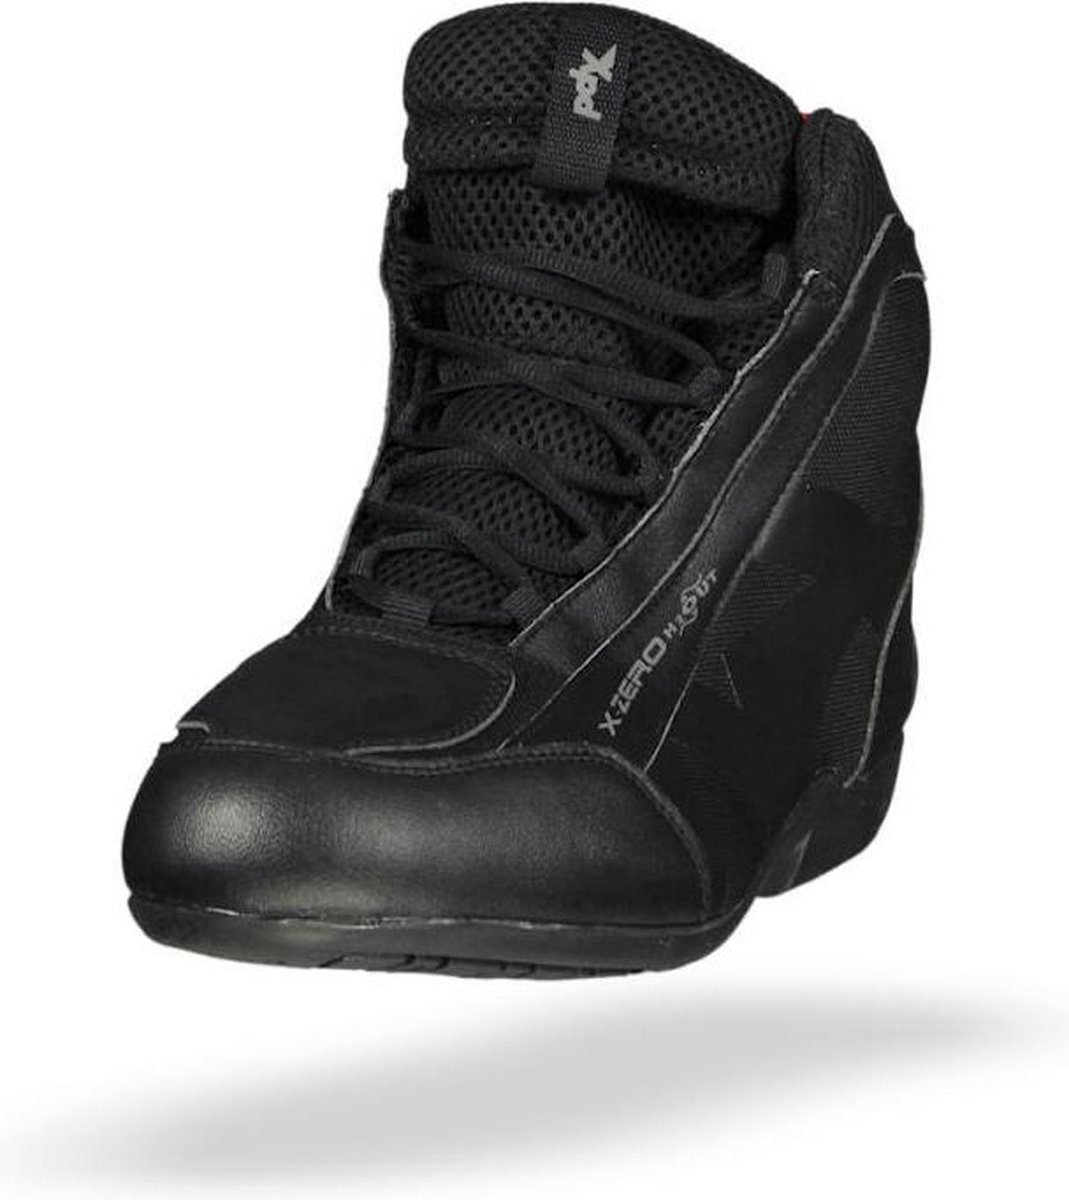 XPD X-ZERO H2OUT BLACK BOOTS 40 - Maat - Laars